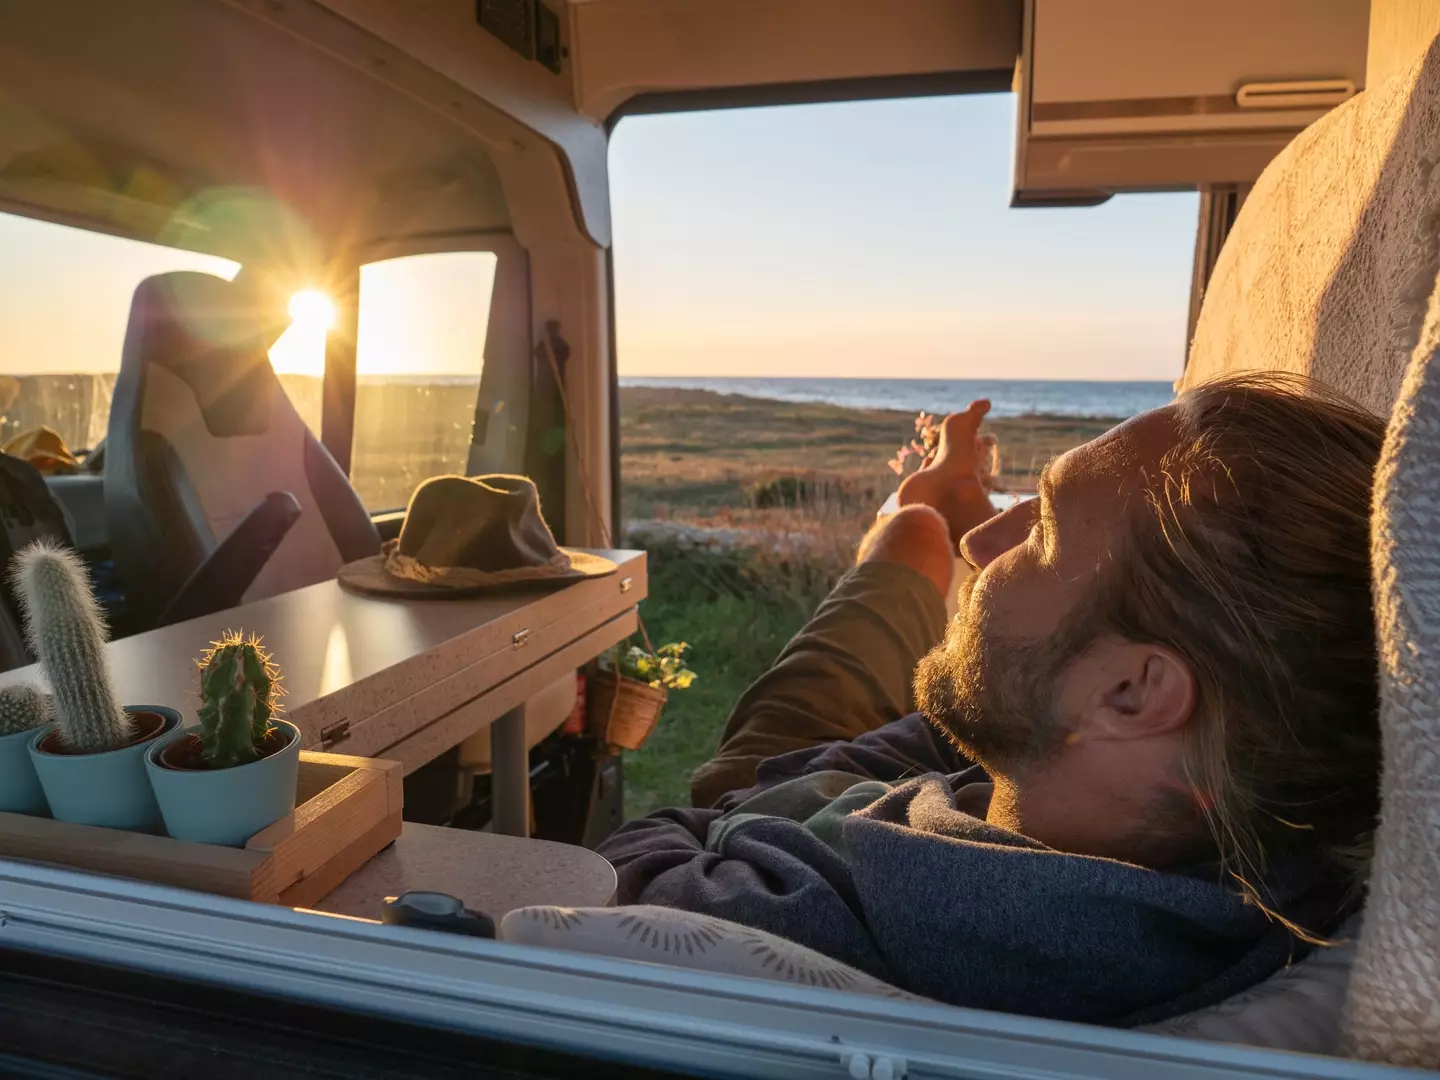 Campervan: a cheating trope or not? (Mystockimages/Getty Images)